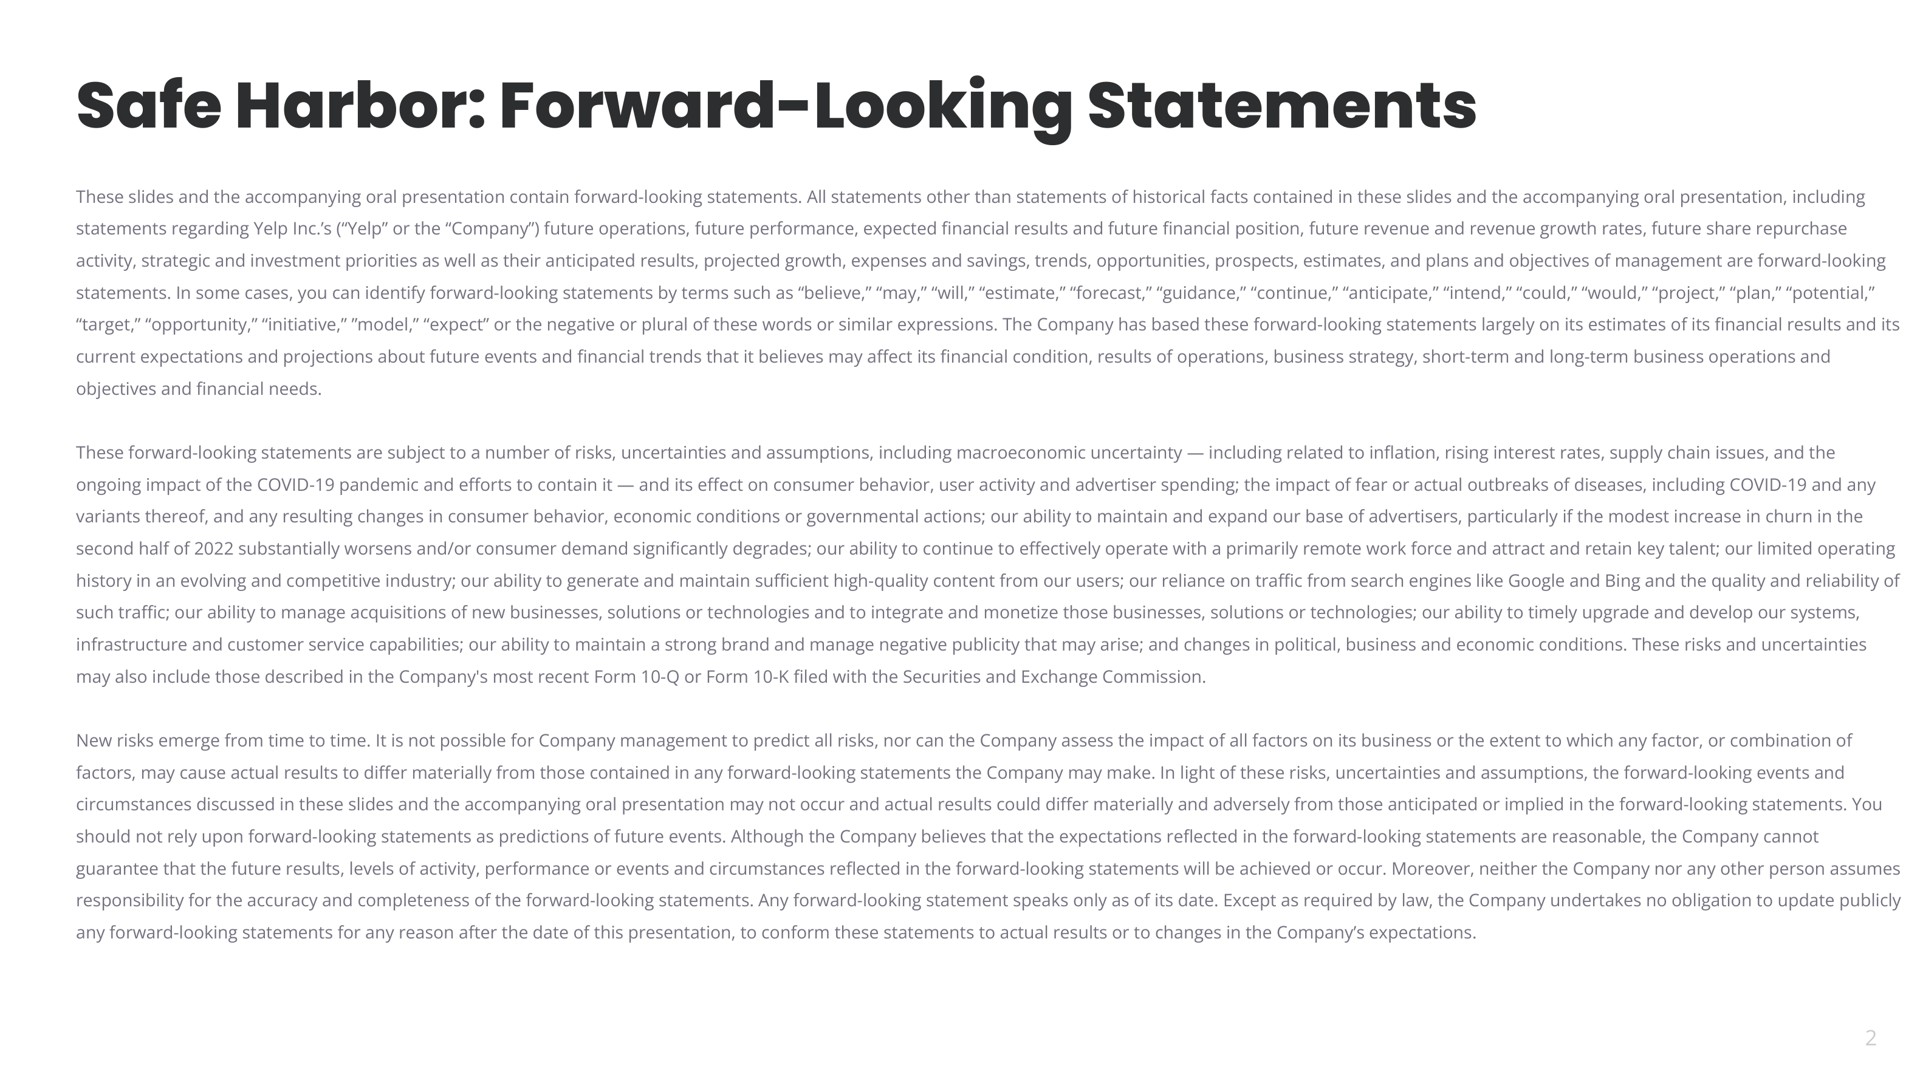 safe harbor forward looking statements | Yelp